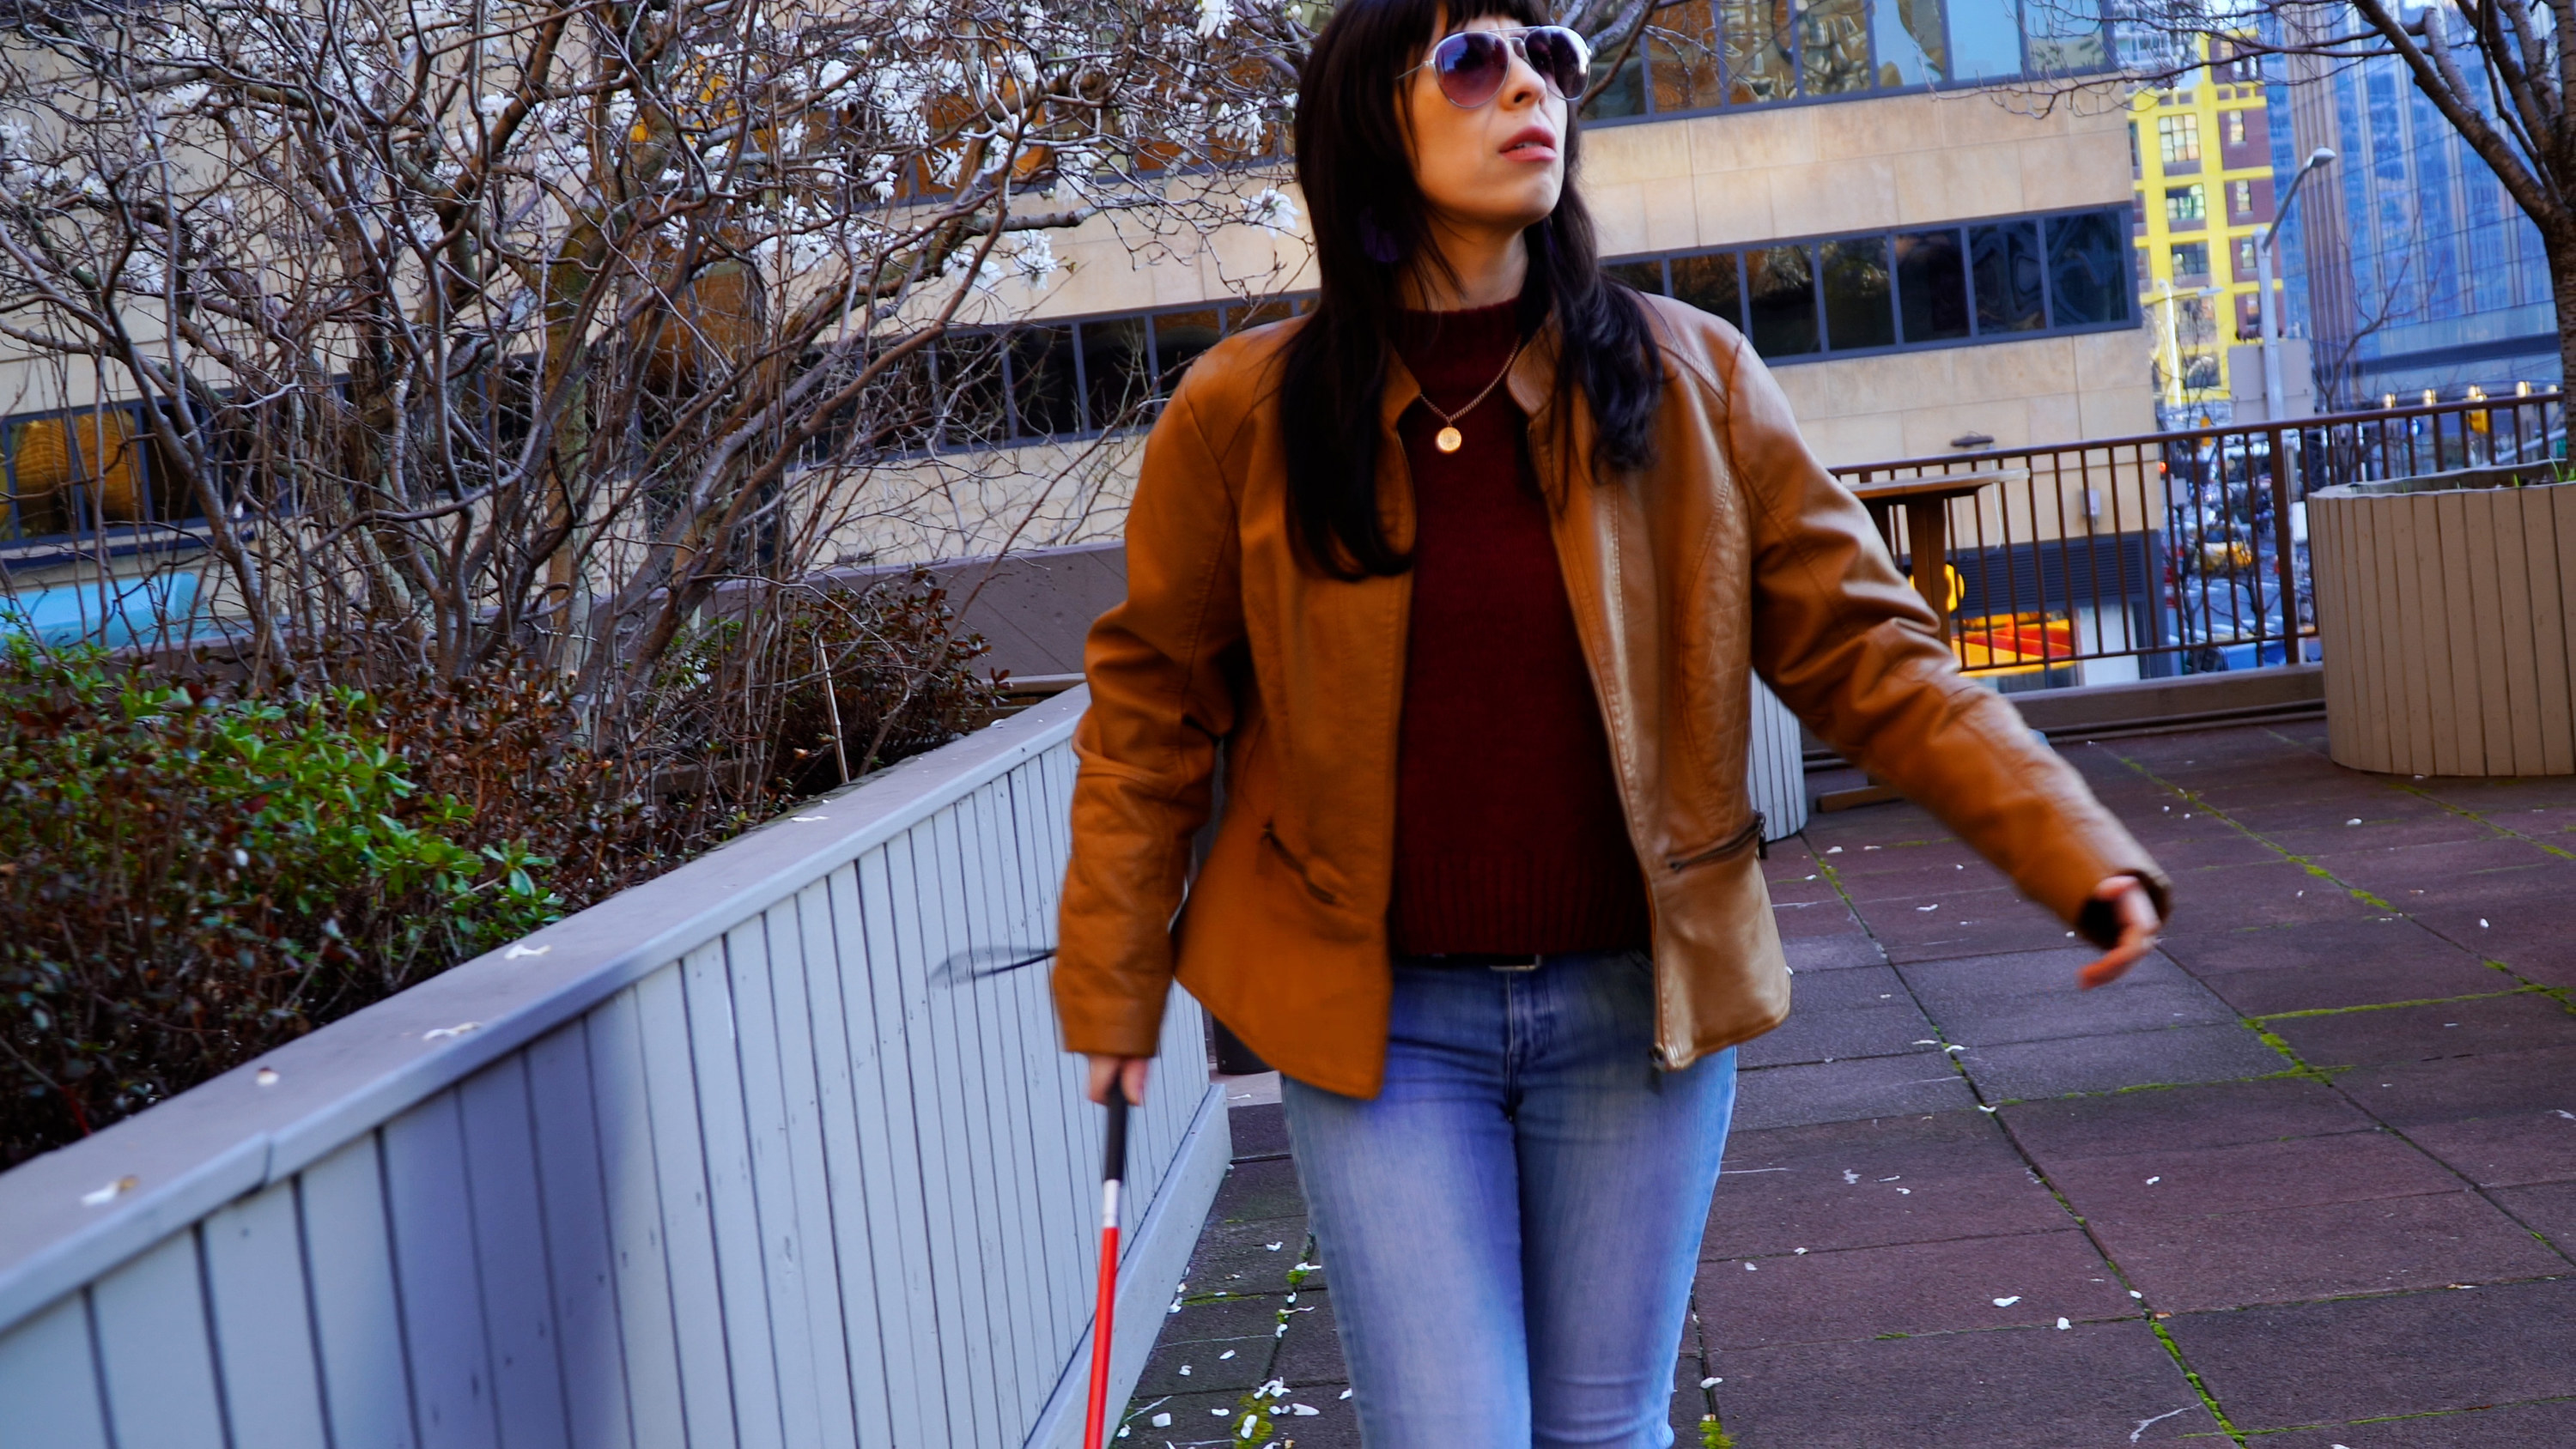 Logan (Melissa Jennifer Gonzalez) walks on an outdoor patio with a blind cane. They are wearing blue jeans, a maroon sweater, and a tan leather jacket. Logan is Latinx, female presenting.